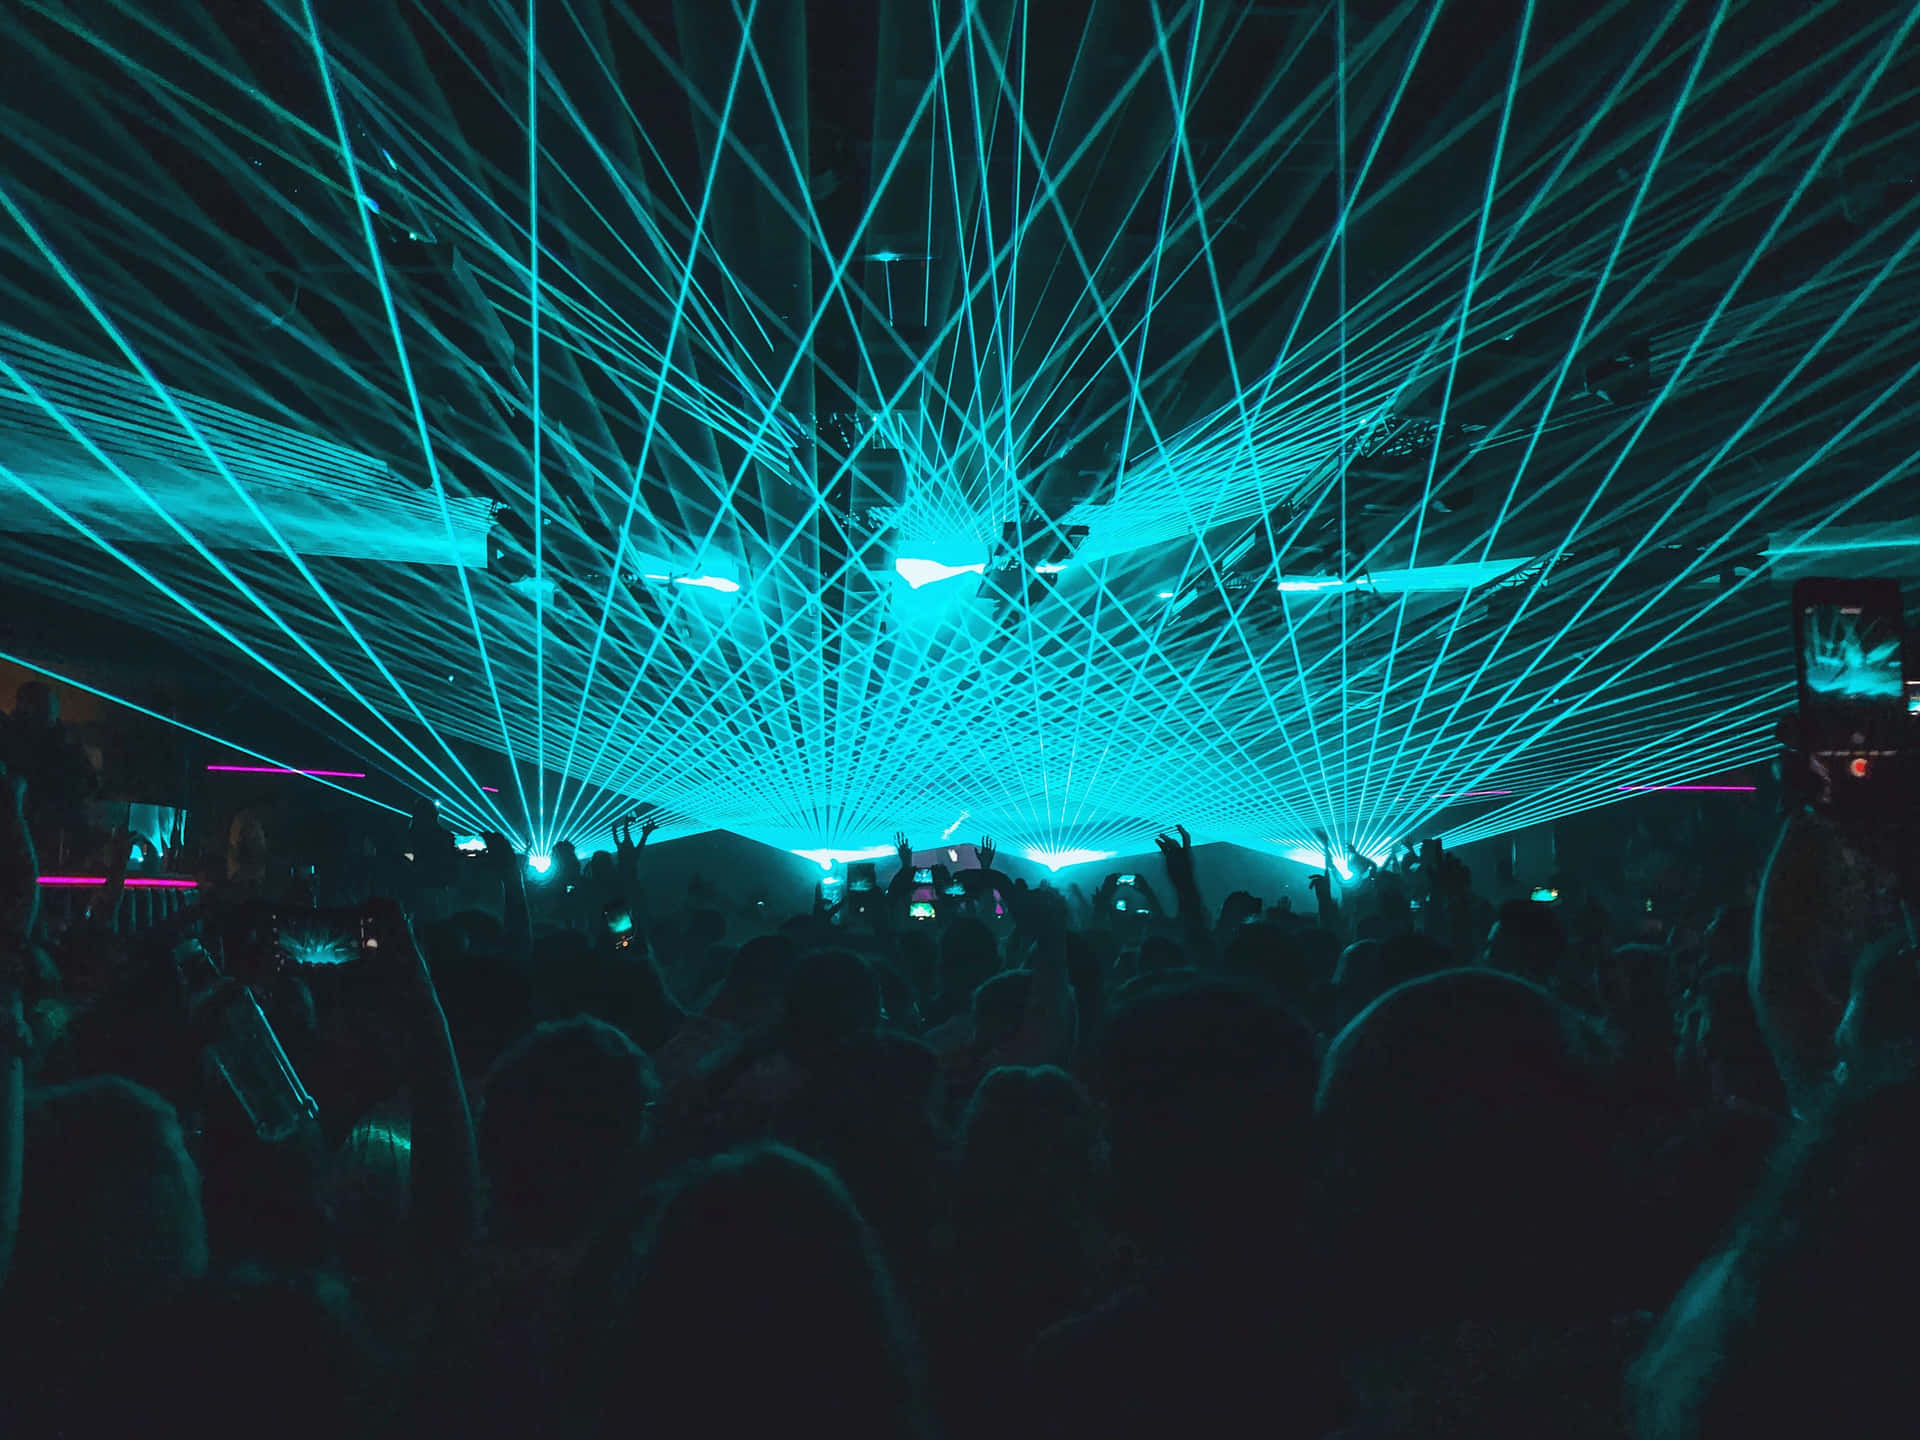 A Crowd At A Nightclub With Laser Lights